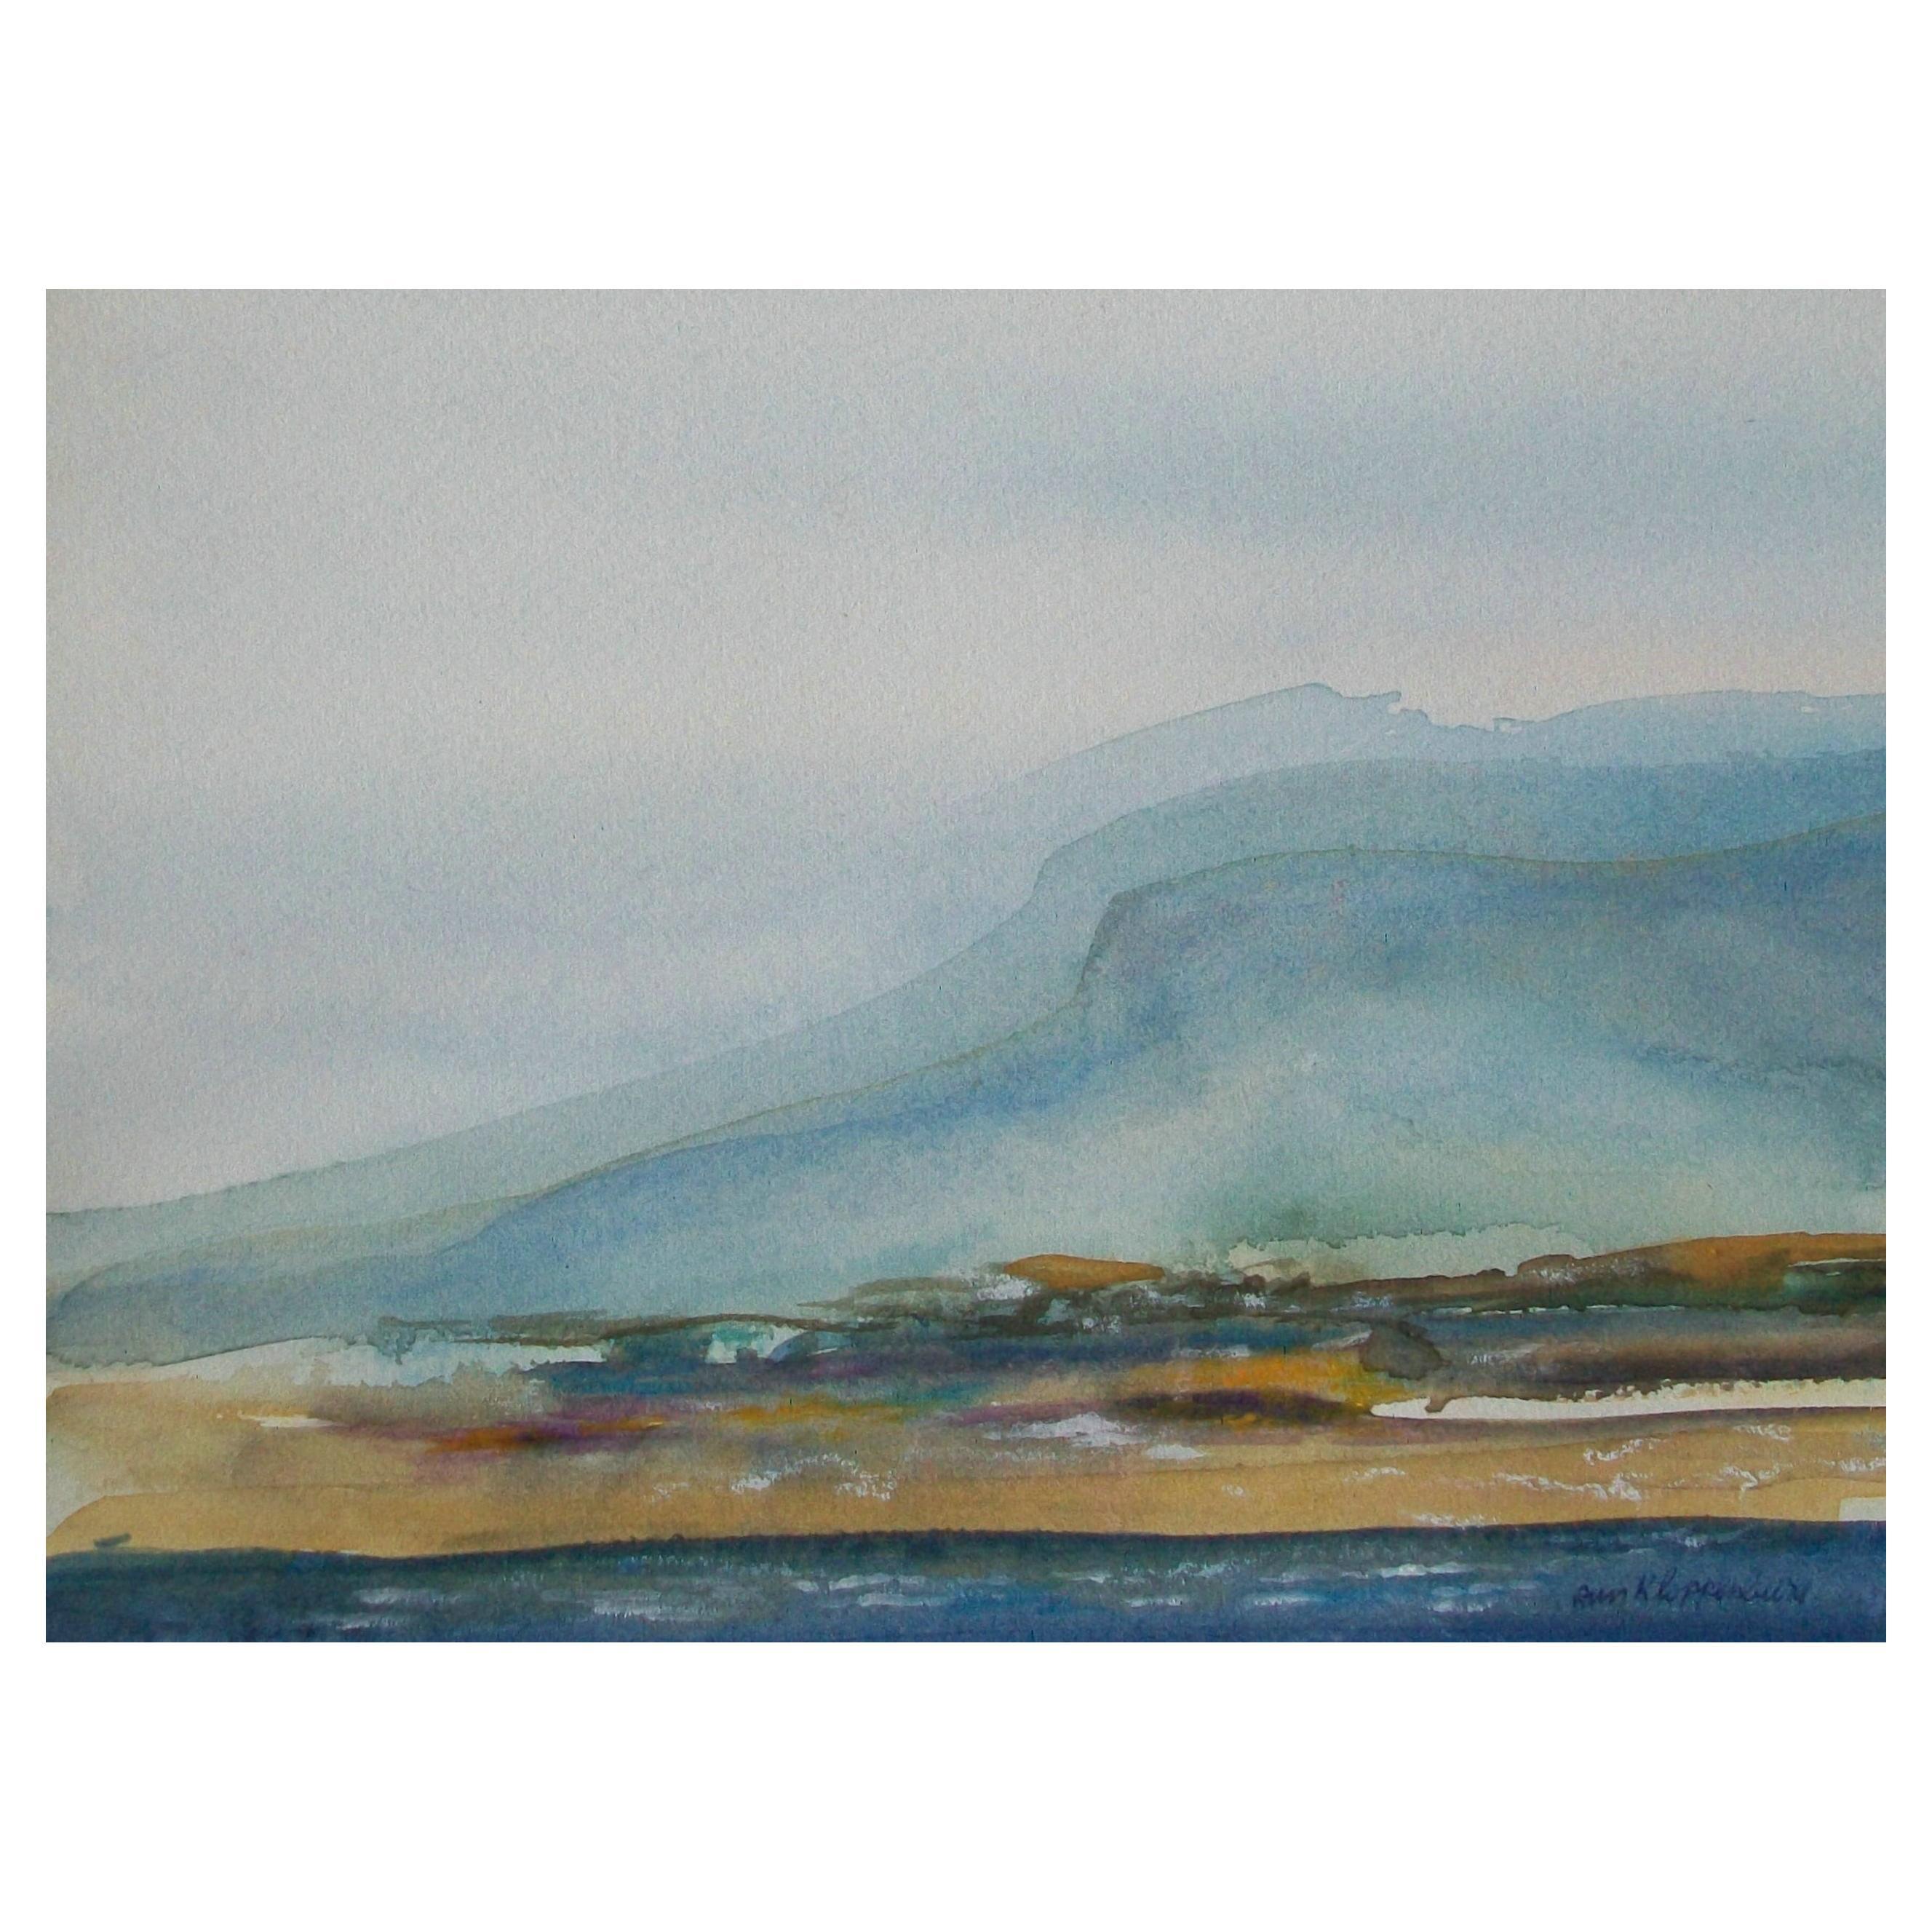 ANN KLOPPENBURG - 'Mullaghmore Beach' - Watercolor Painting - Canada - C. 1990's For Sale